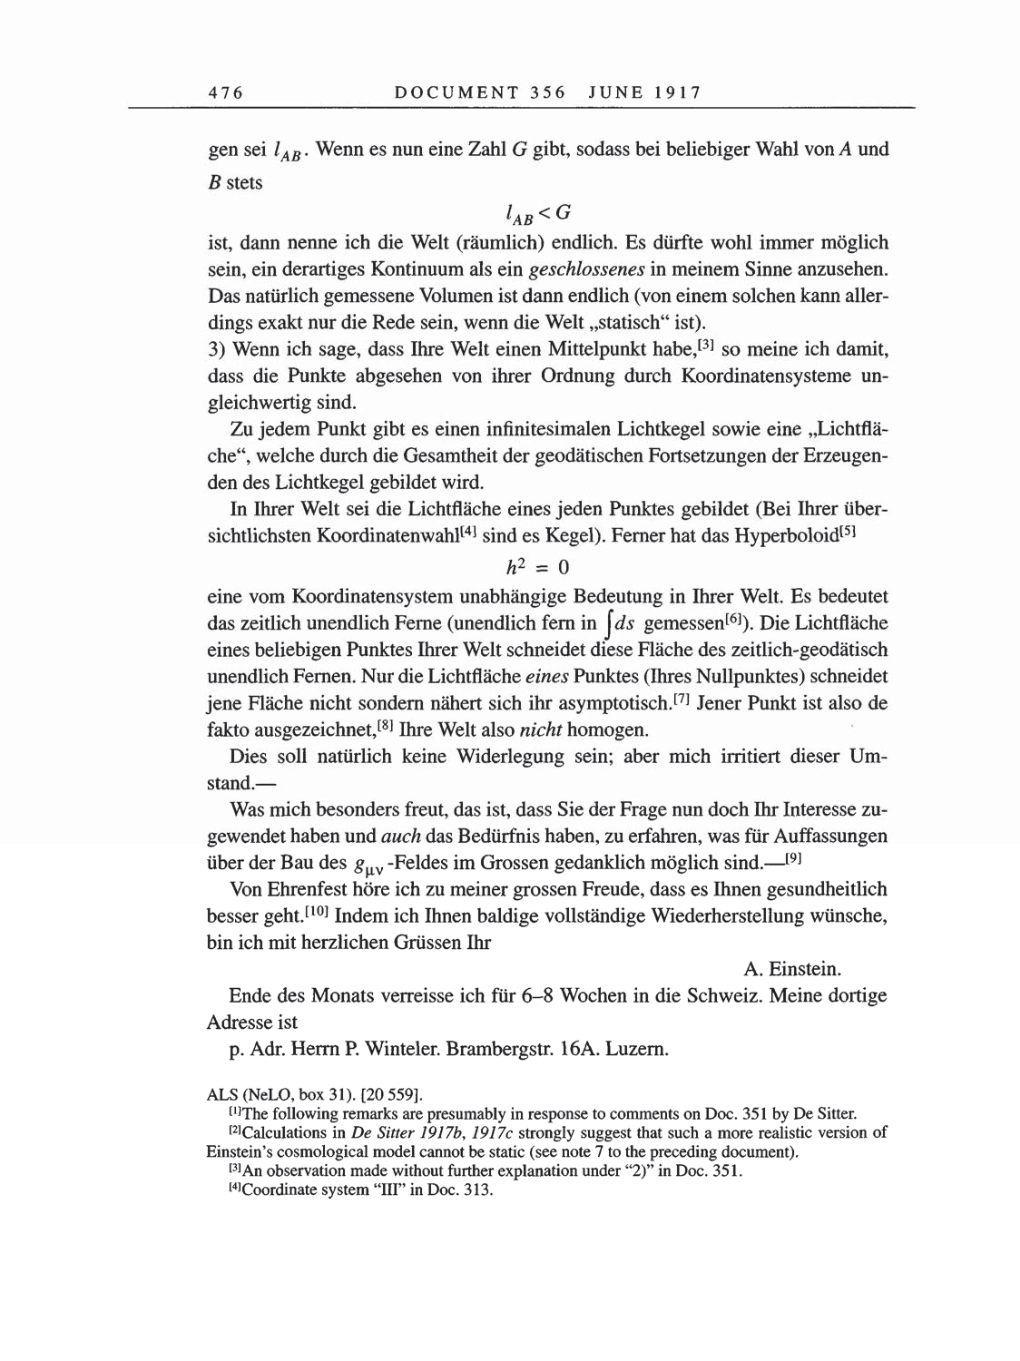 Volume 8, Part A: The Berlin Years: Correspondence 1914-1917 page 476